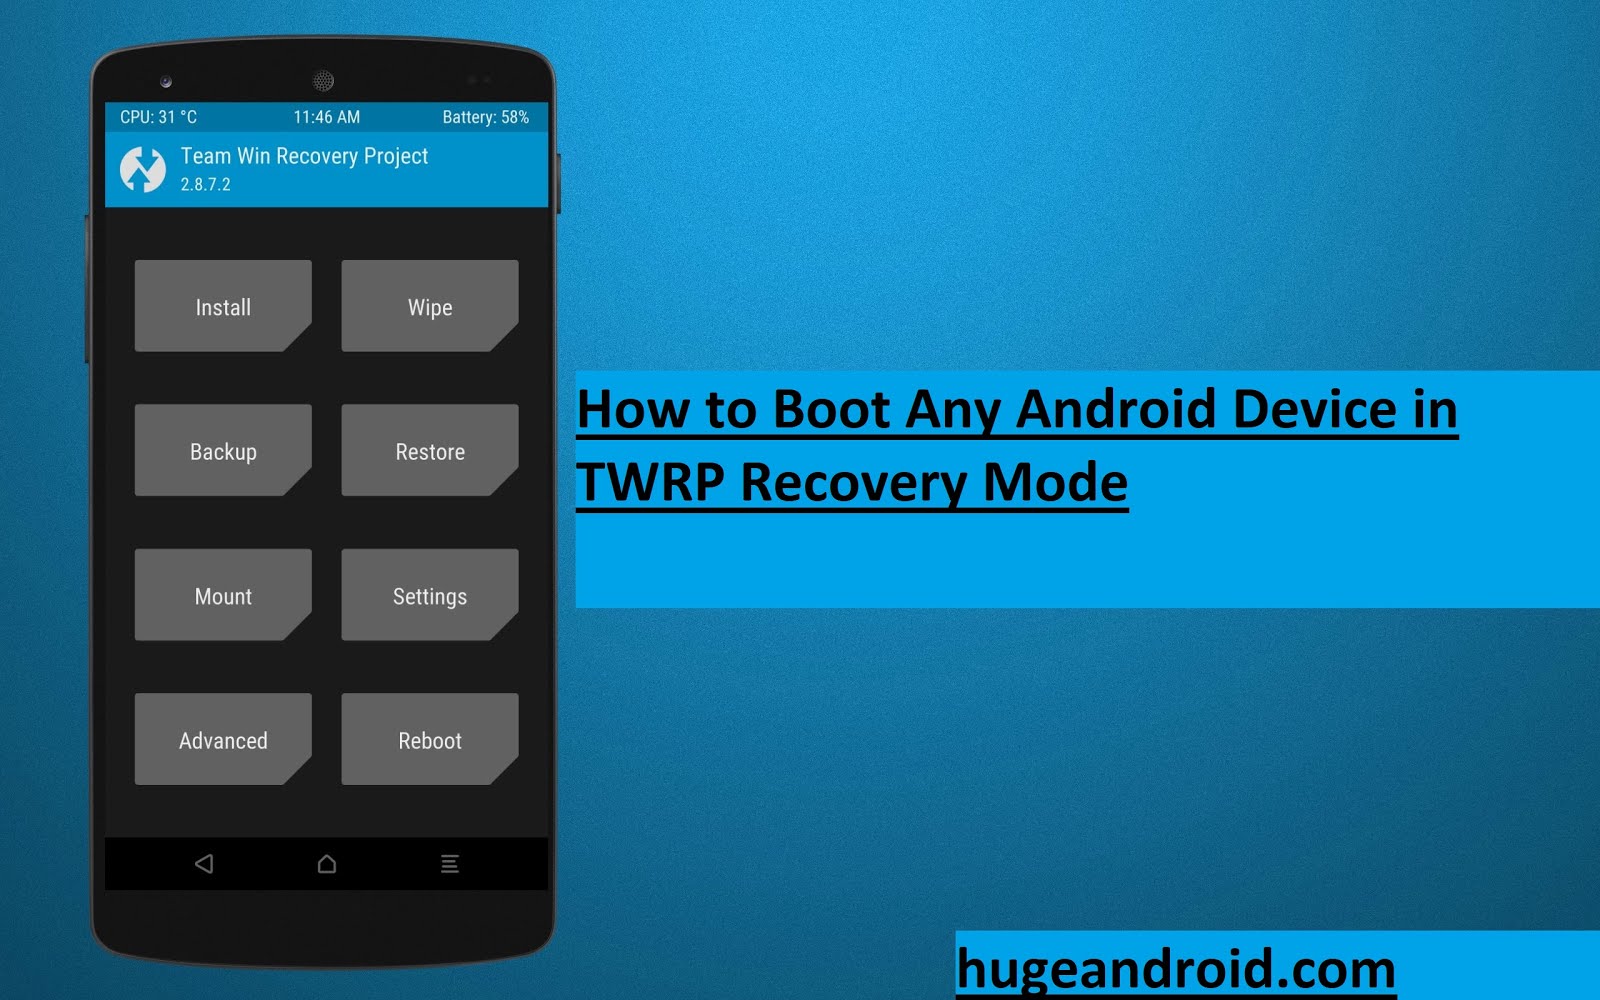 Boot%2BAny%2BAndroid%2BDevice%2Bin%2BTWRP%2BRecovery%2BMode